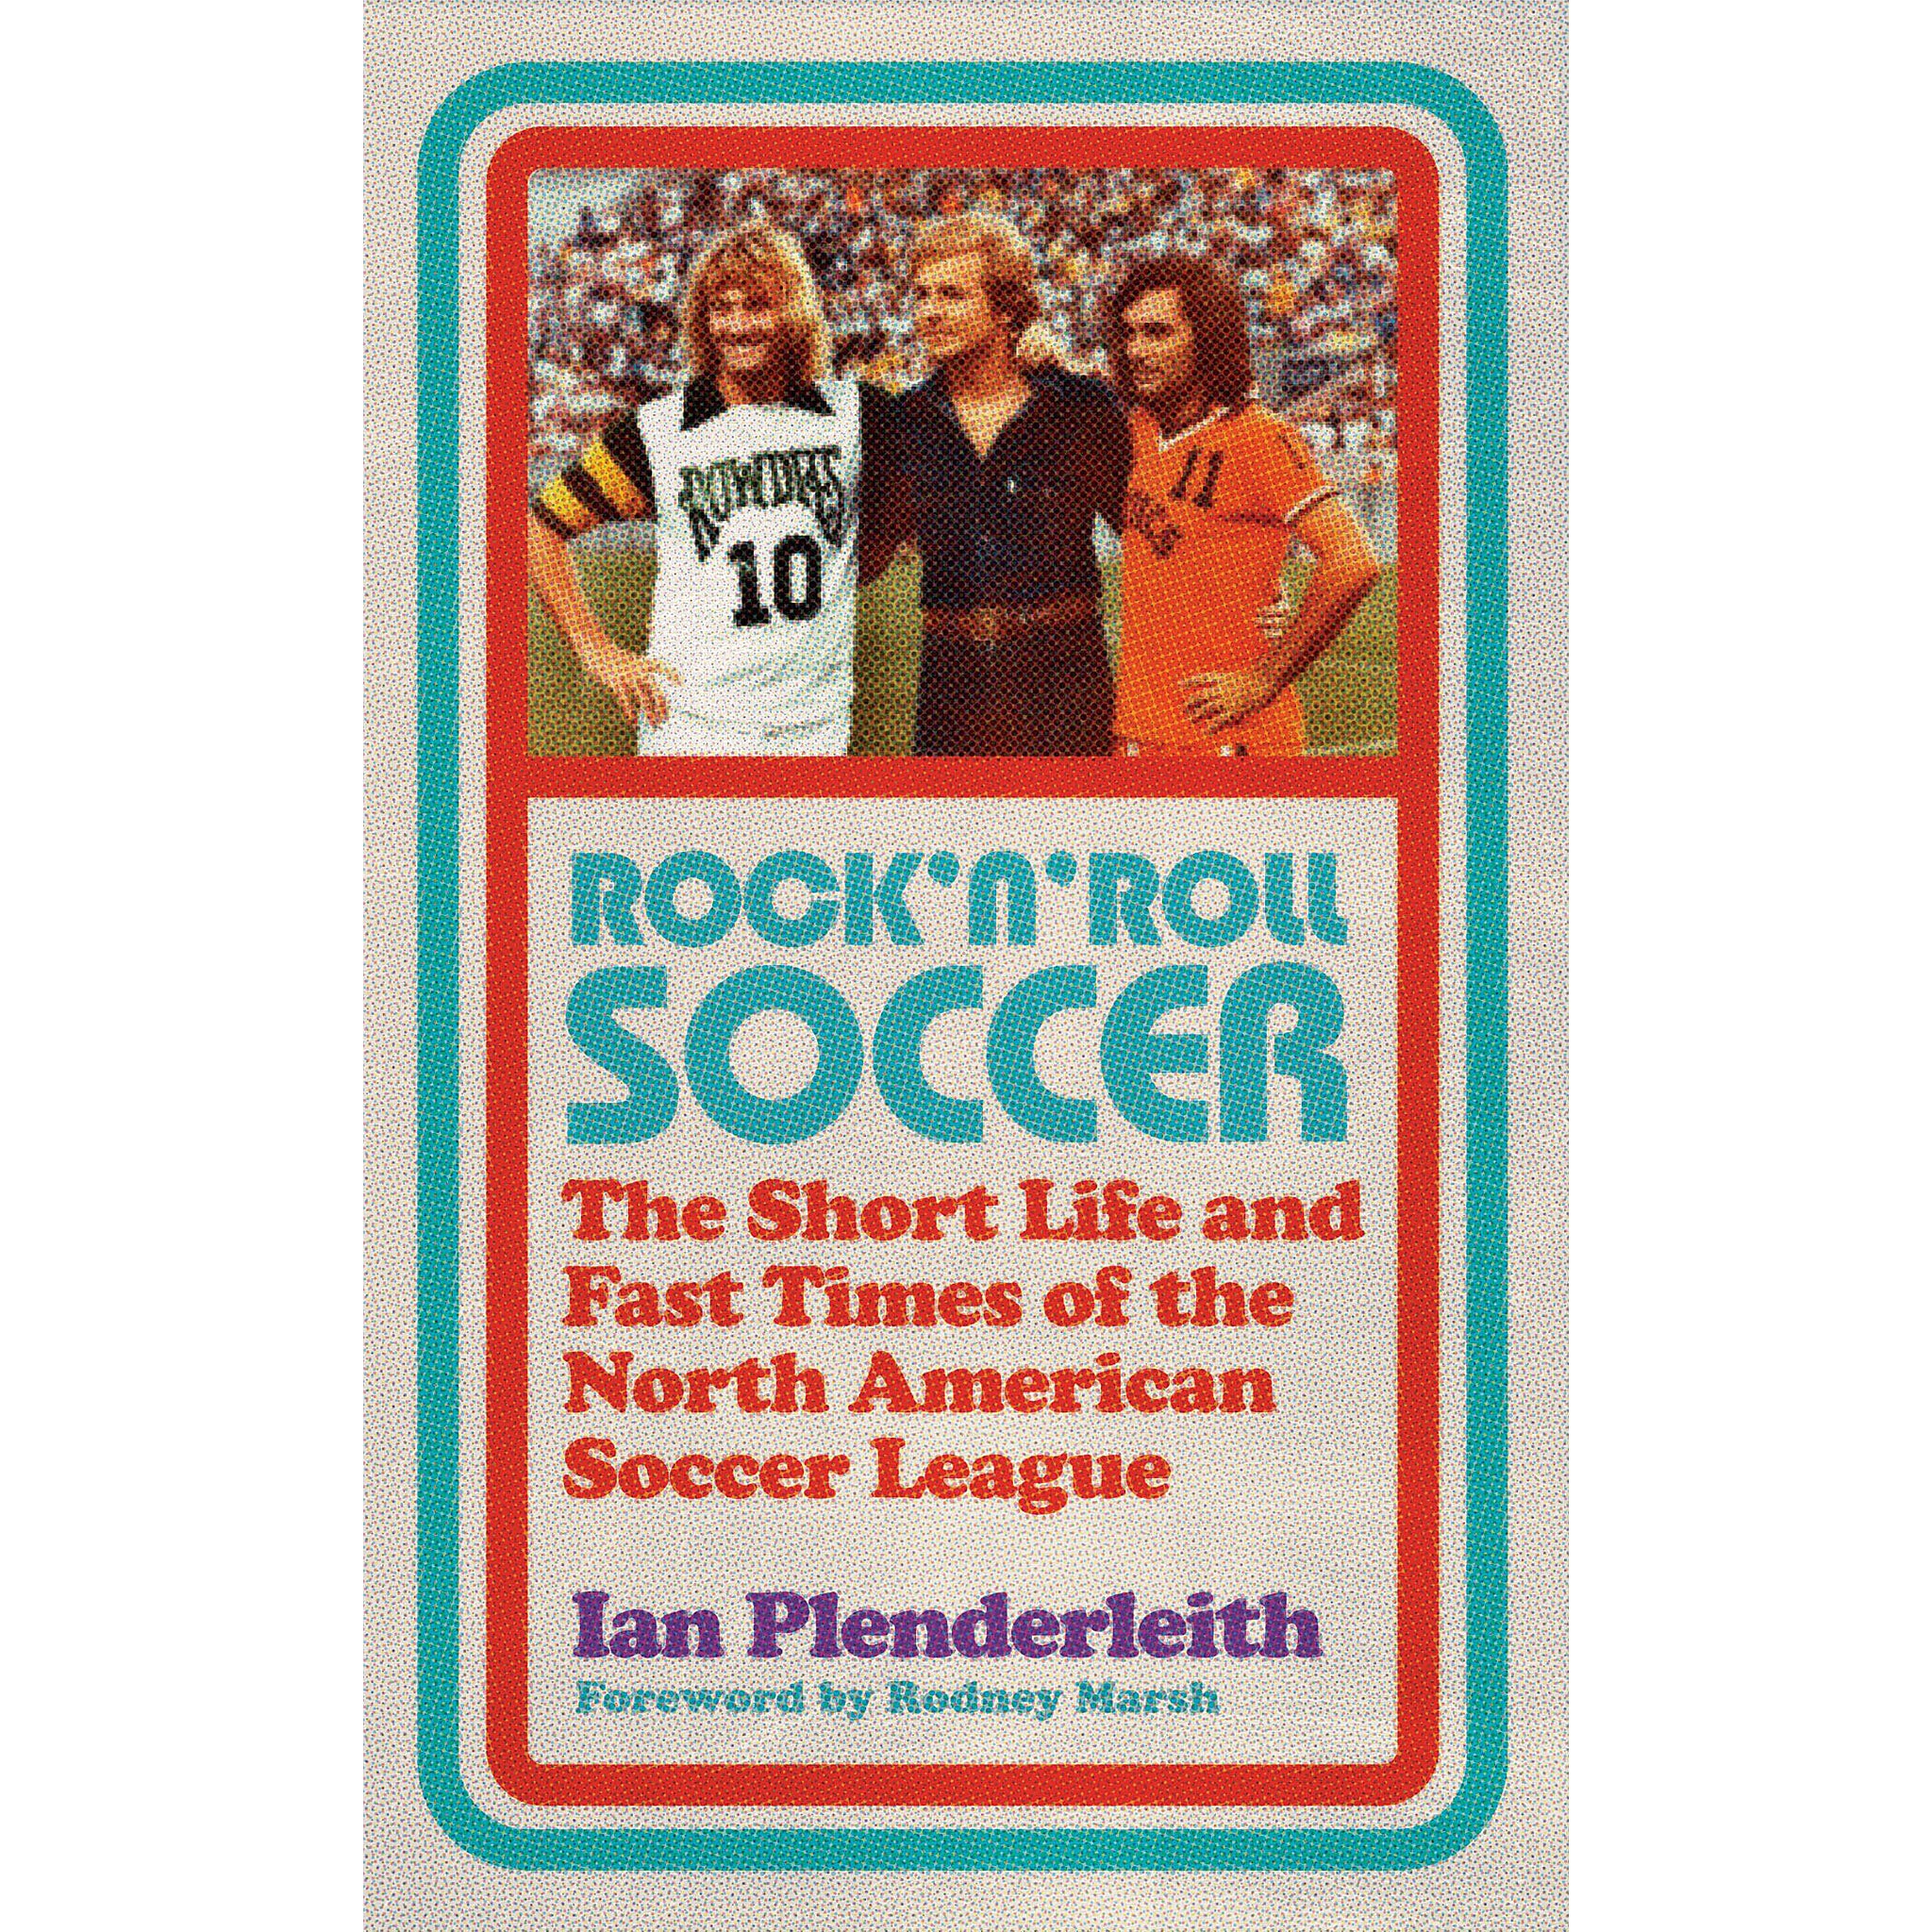 Rock 'n' Roll Soccer – The Short Life and Fast Times of the North American Soccer League